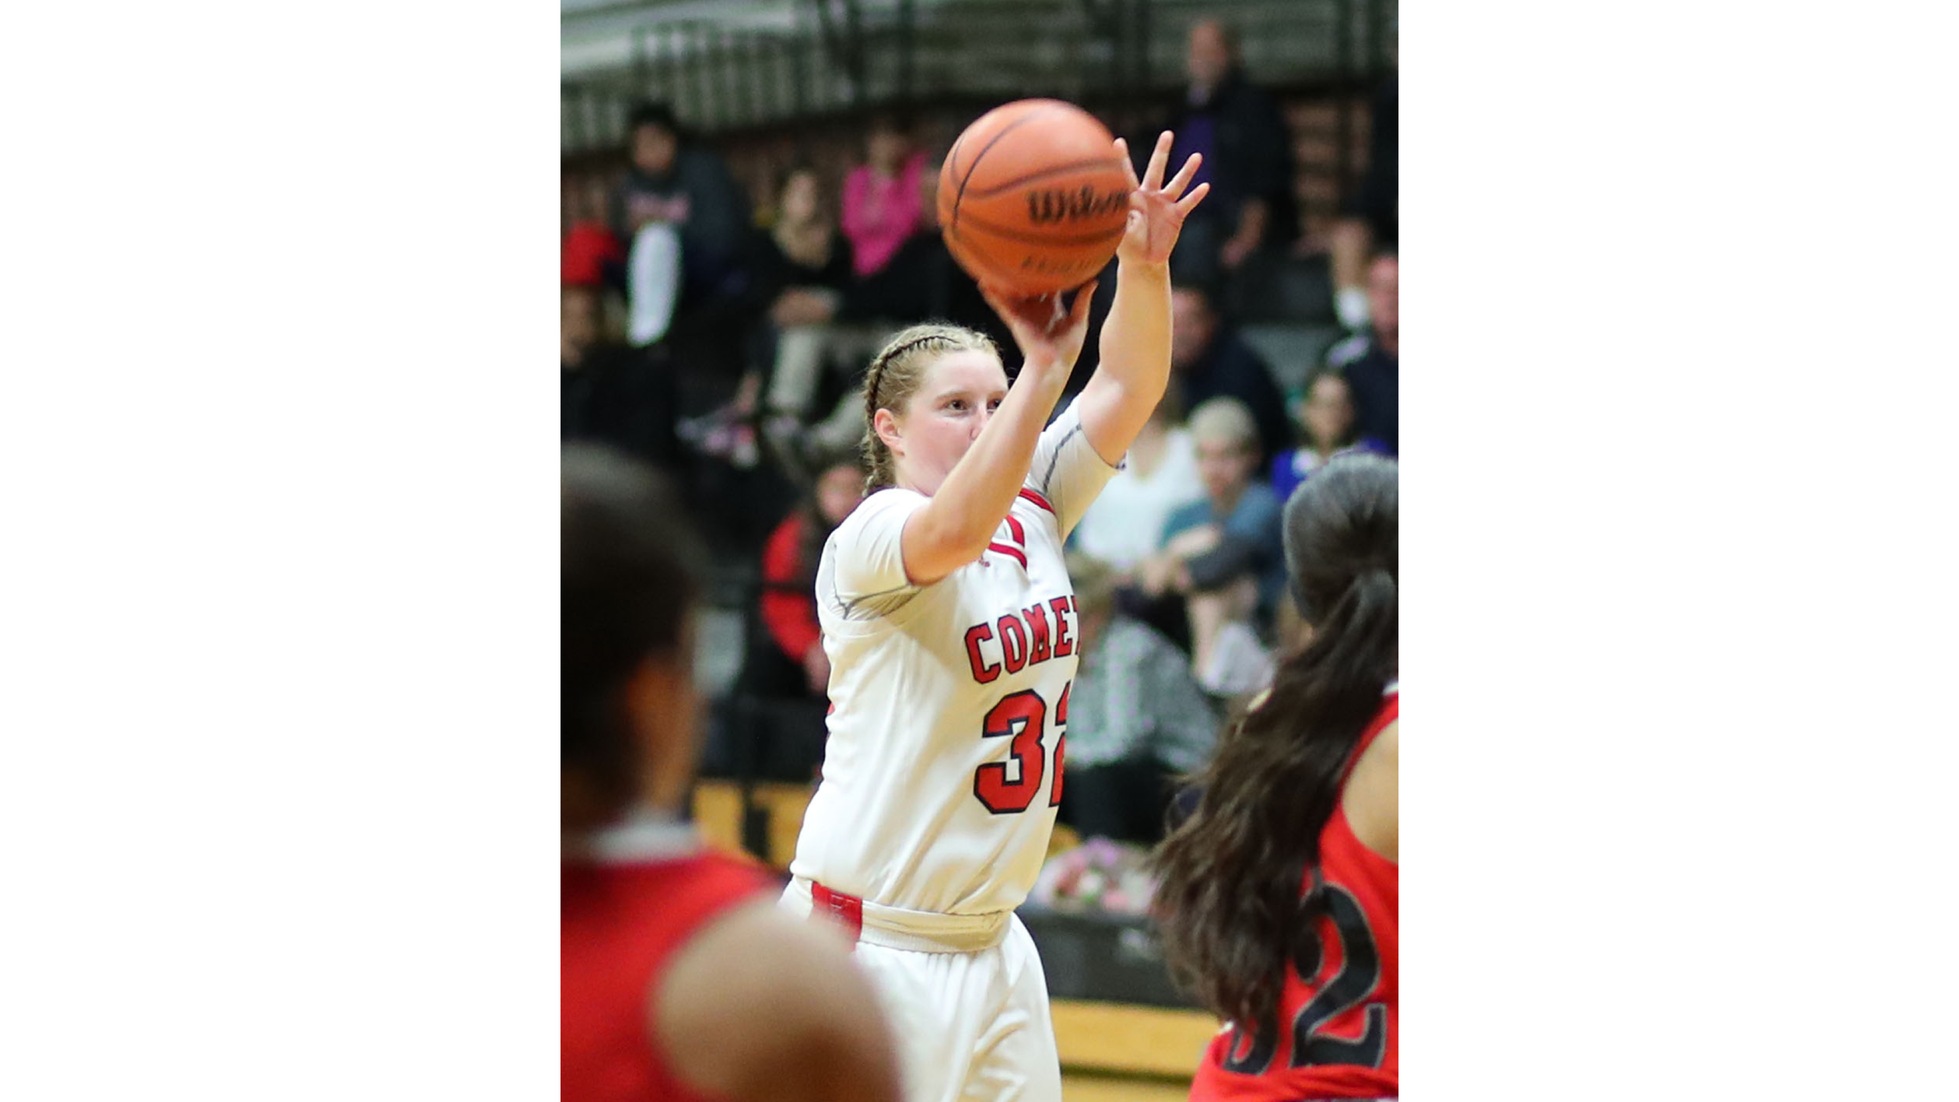 Mackenna Gentry finished the night with 14 points. Photo by Hugh Cox (taken 2/14).